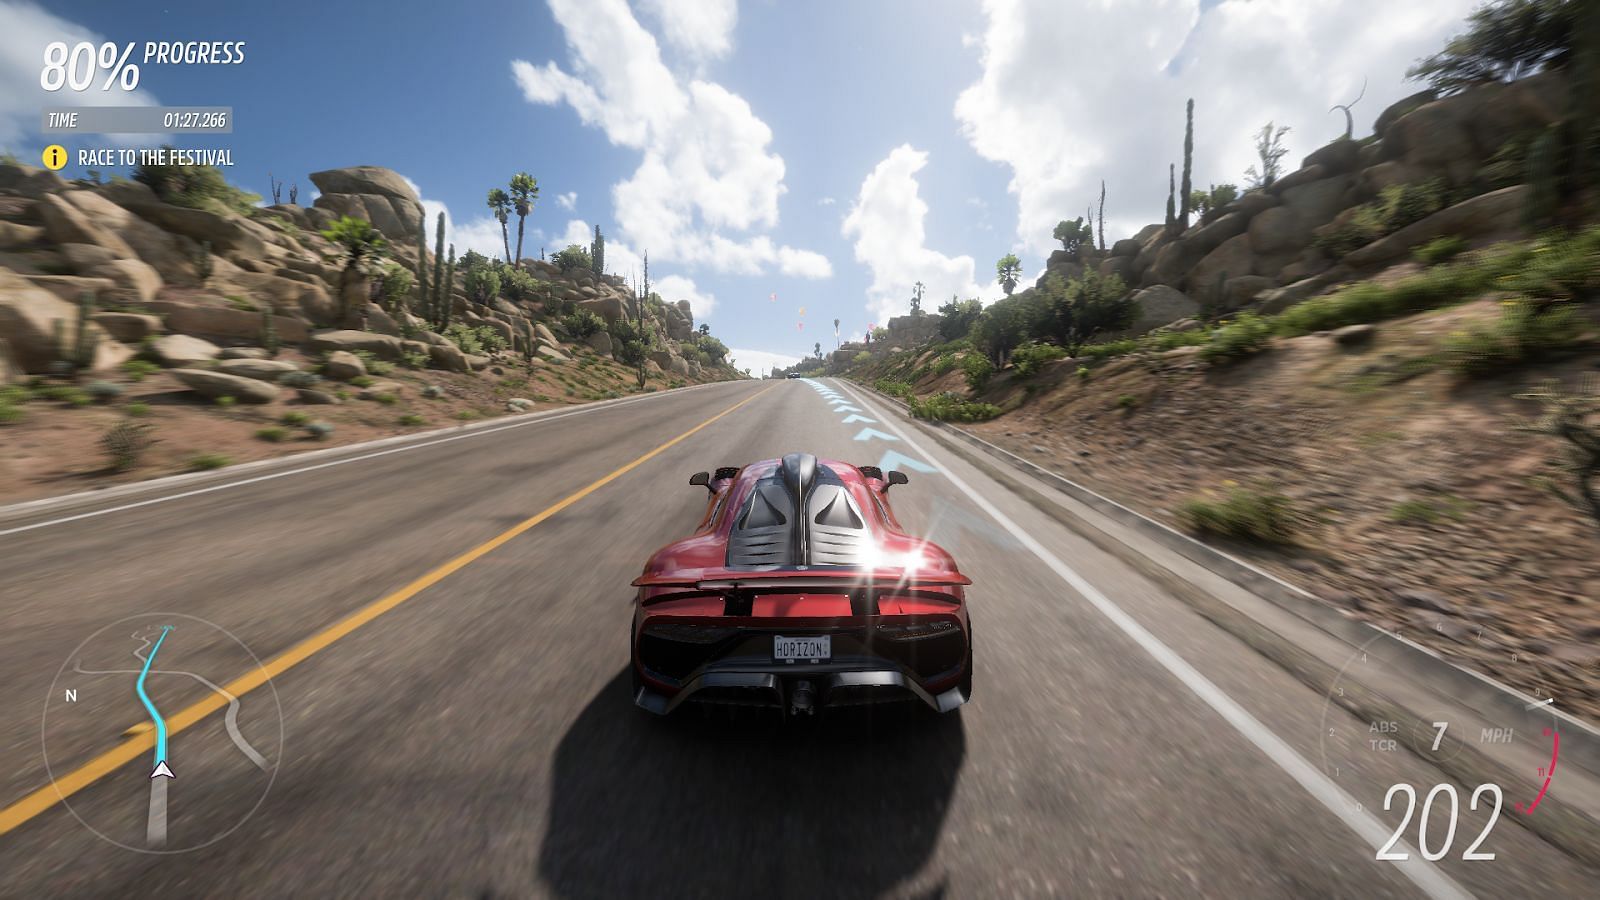 Open roads and a Mercedes-AMG ONE, that's the plan (Screengrab from Forza Horizon 5)